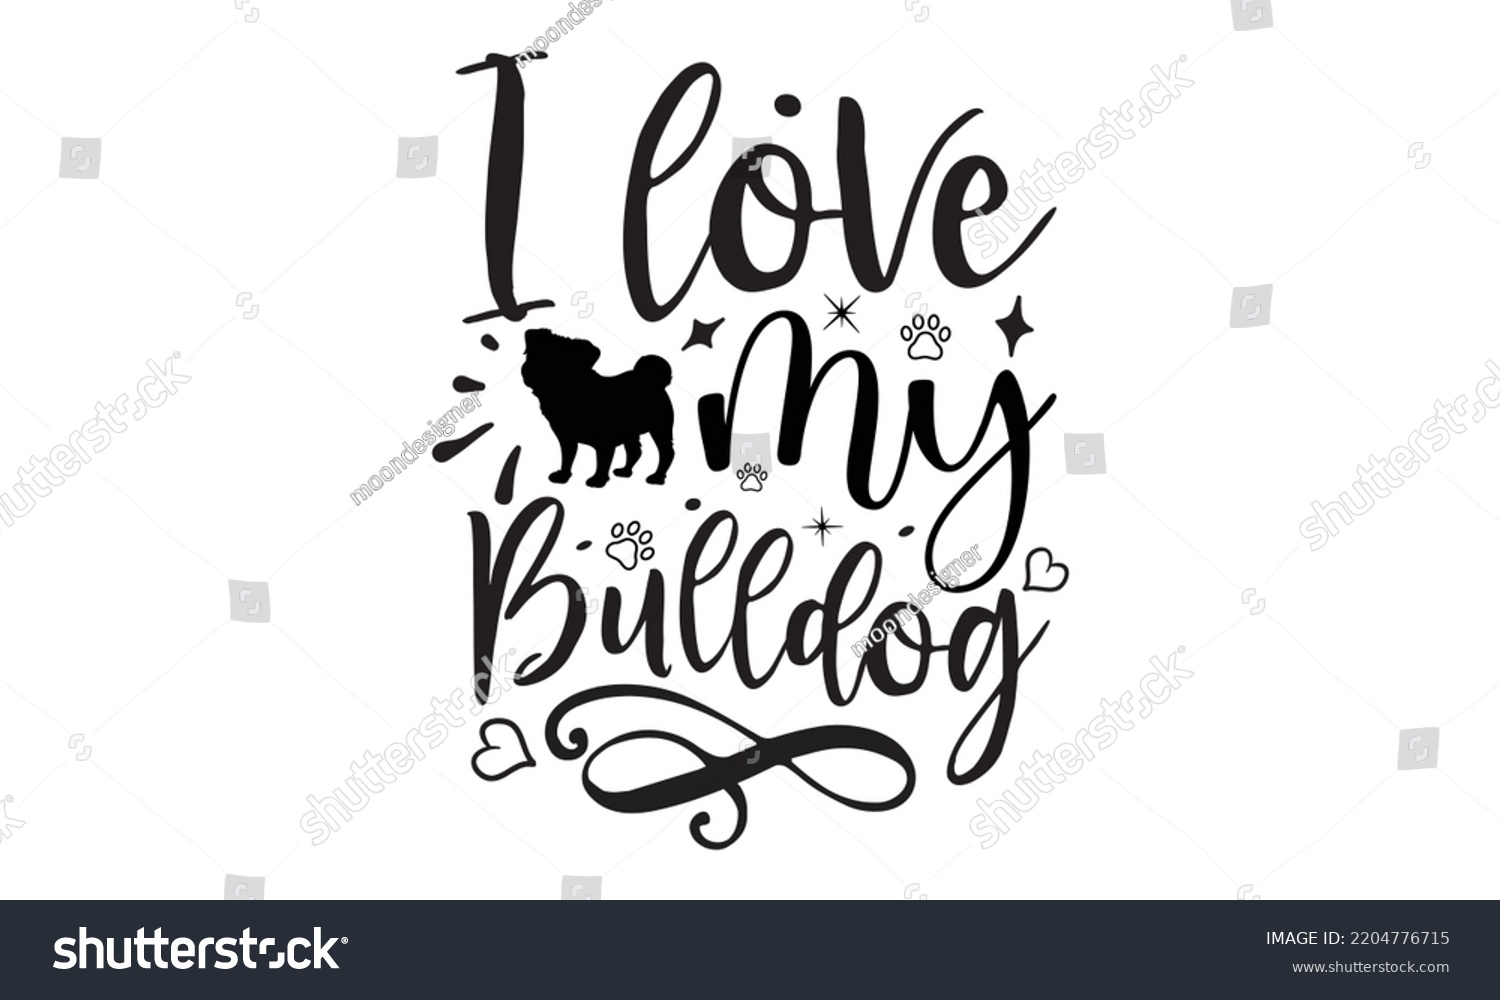 SVG of I love my bulldog - Bullodog T-shirt and SVG Design,  Dog lover t shirt design gift for women, typography design, can you download this Design, svg Files for Cutting and Silhouette EPS, 10 svg